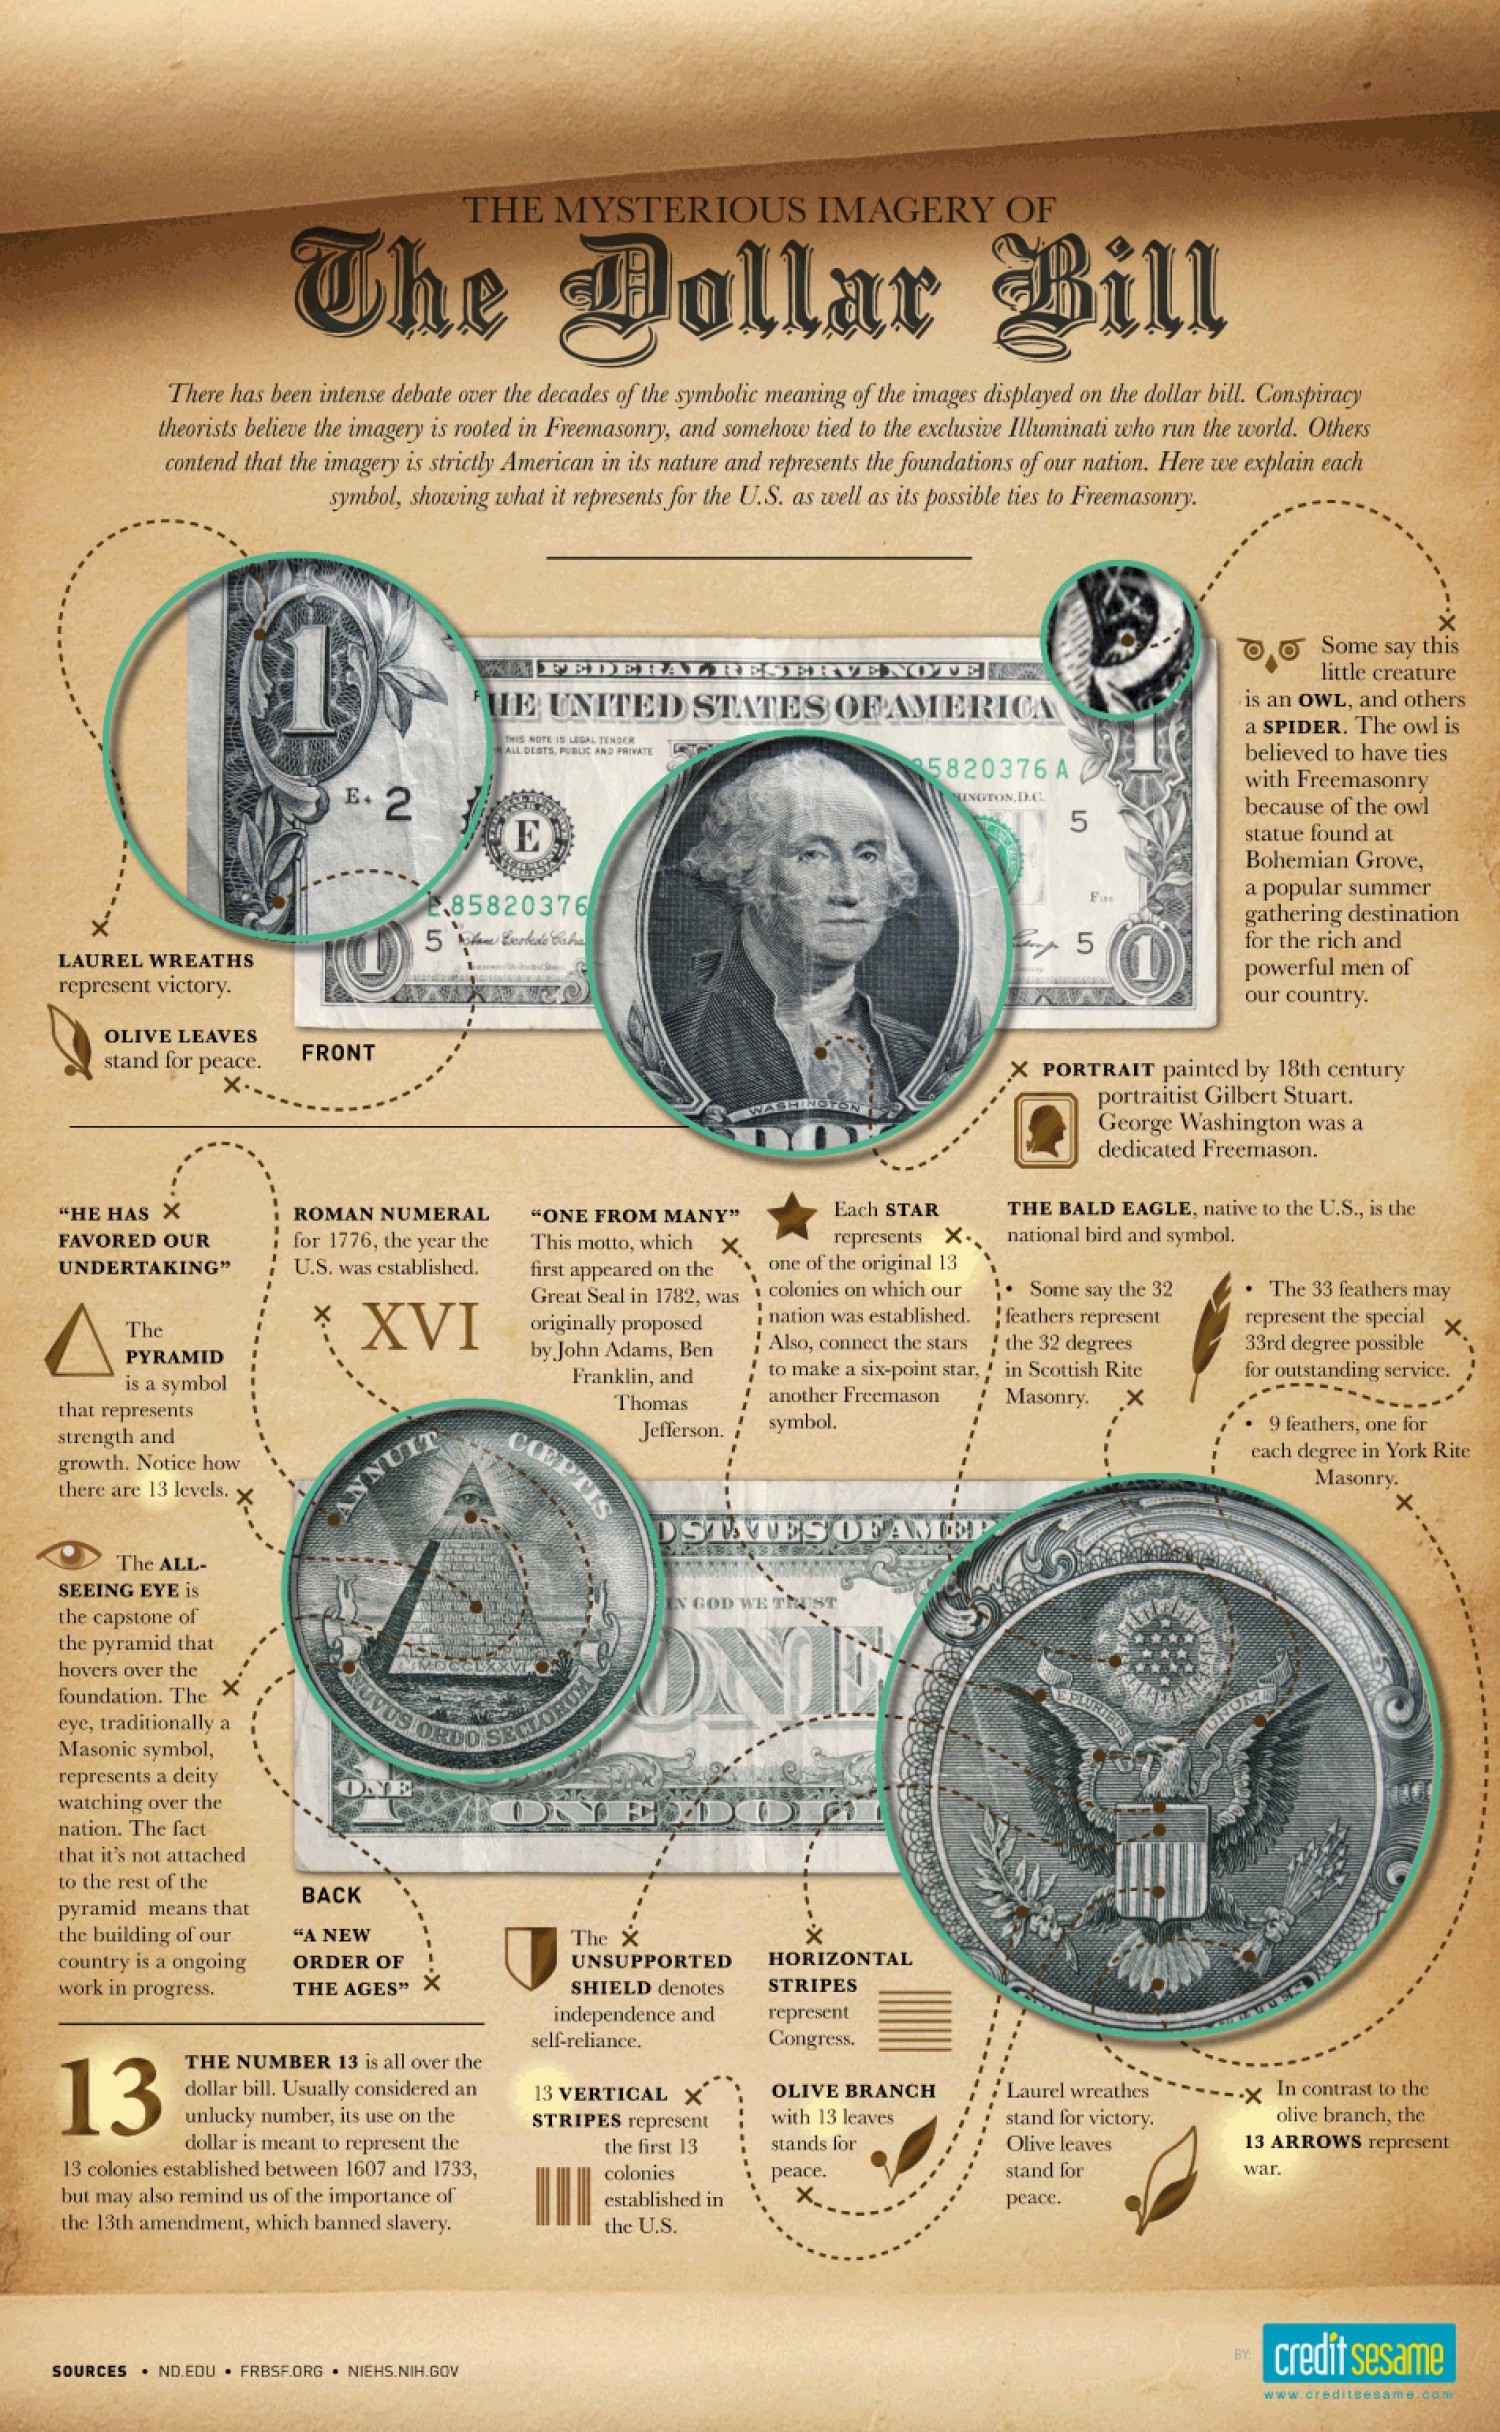 03 the-mysterious-imagery-of-the-dollar-bill_50290b65dbfc1_w1500